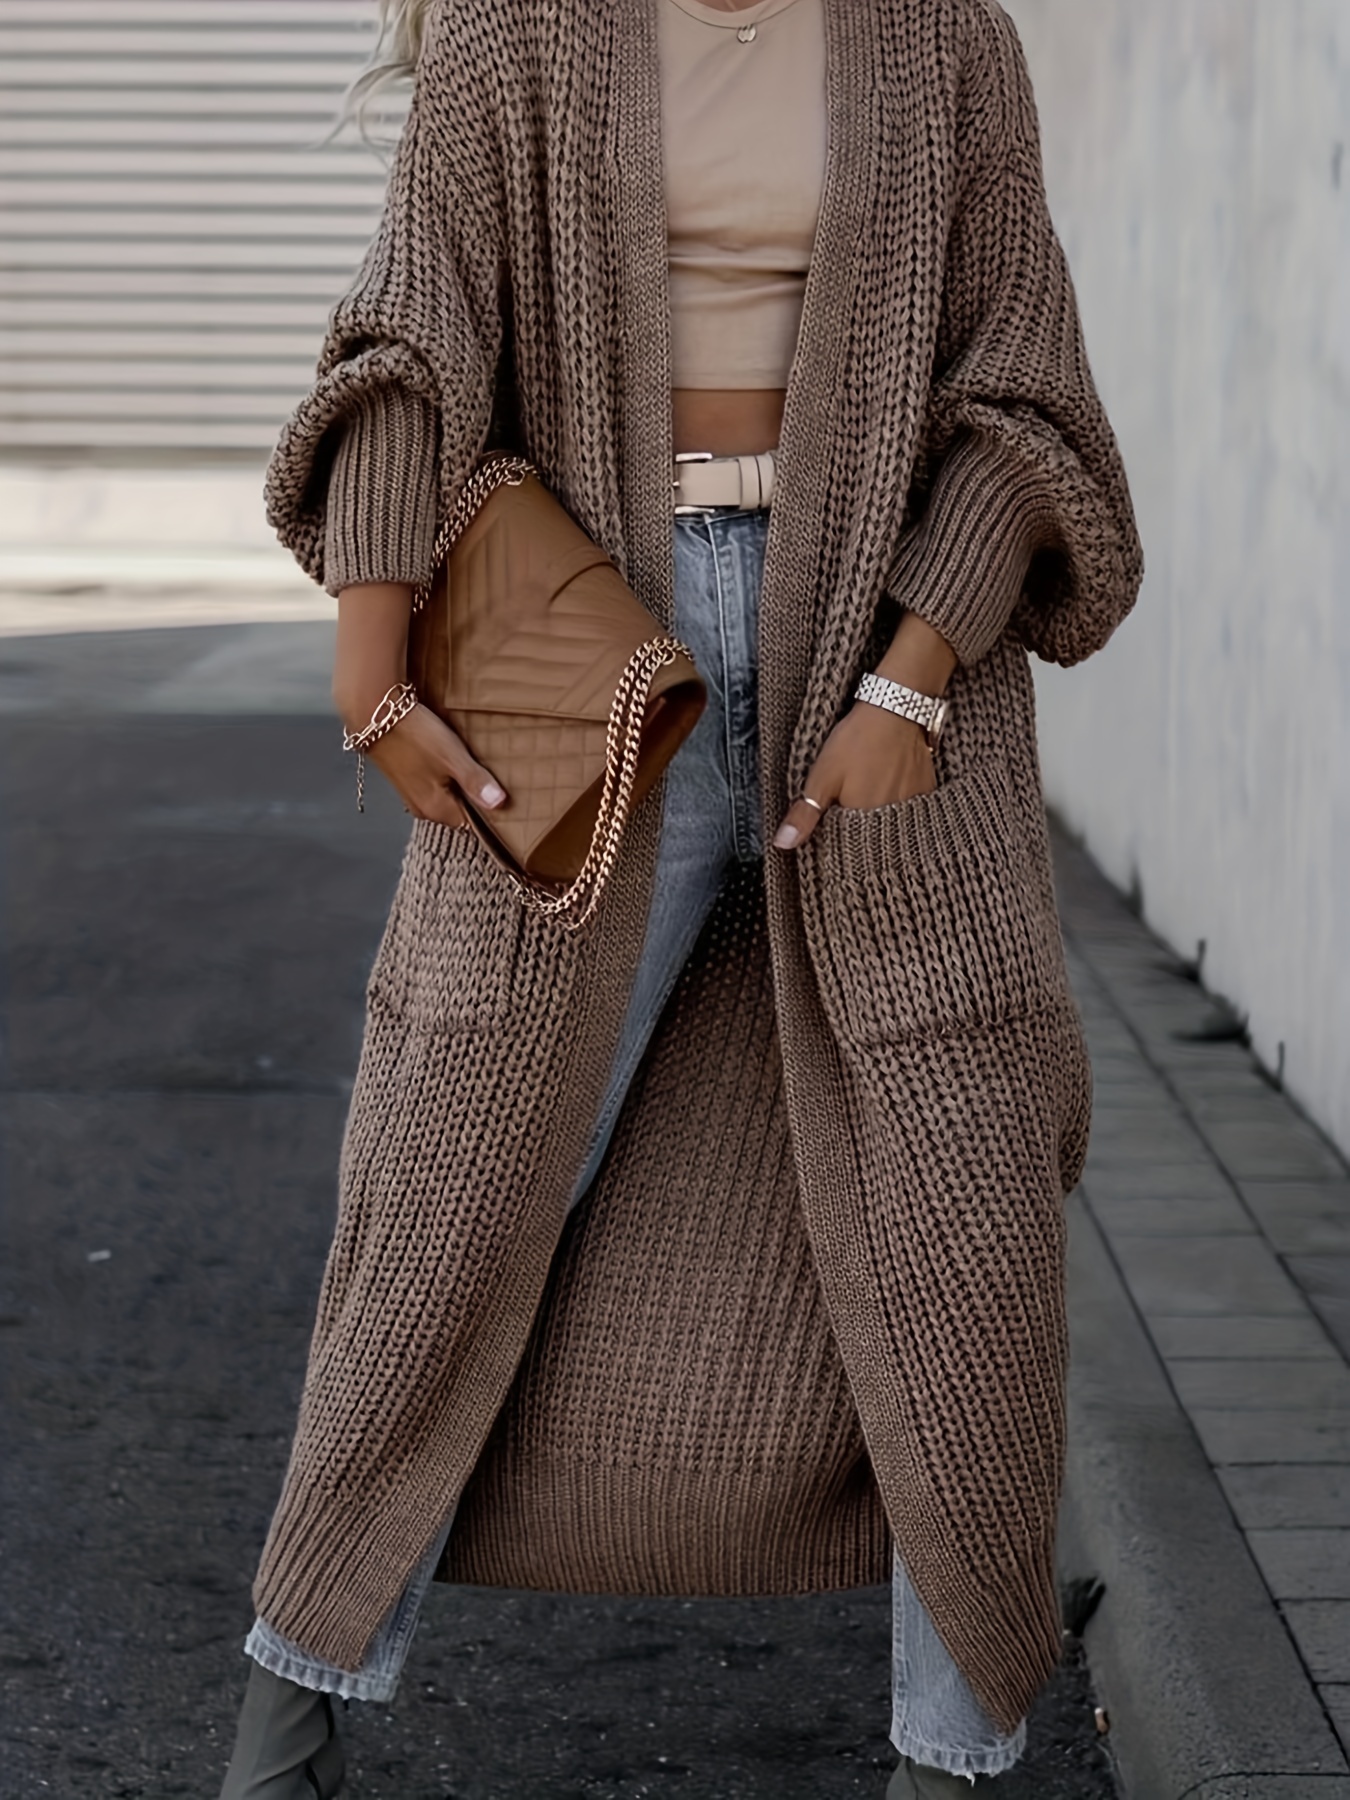 Brown Pumps with Open Cardigan Outfits (6 ideas & outfits)